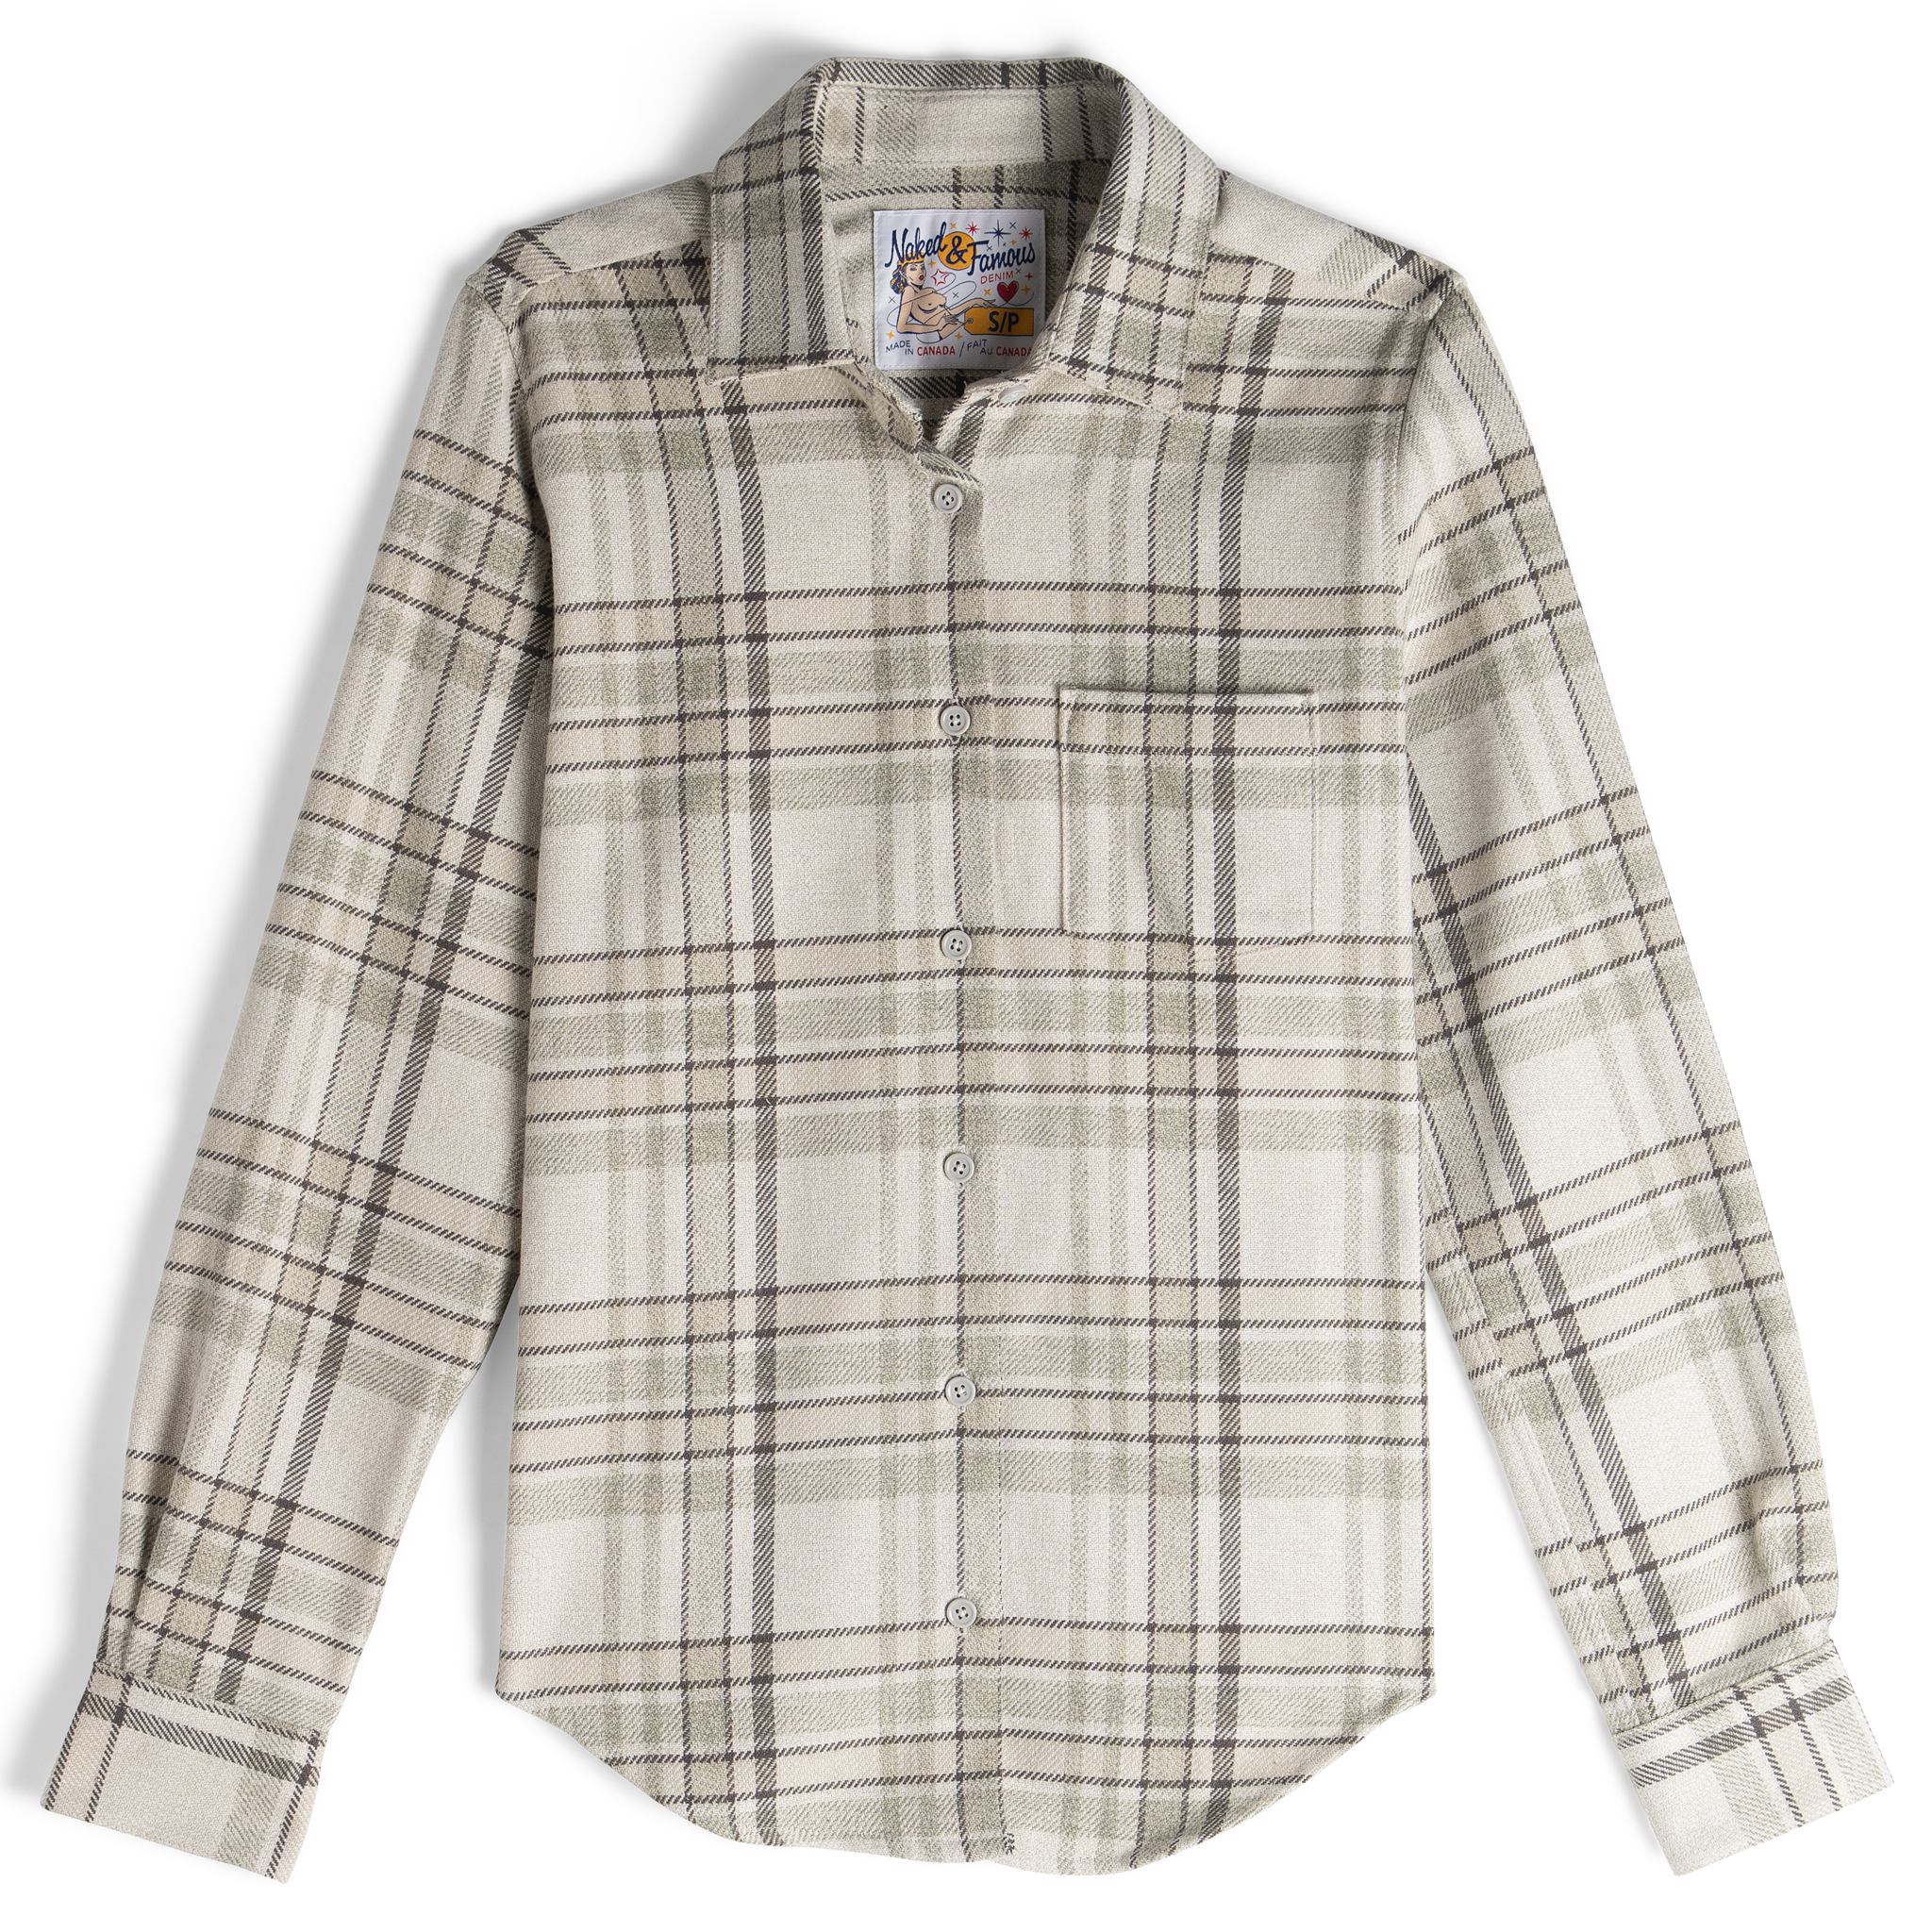  Women’s Country Shirt - Heavy Vintage Flannel - Pale Grey - Flat Front 